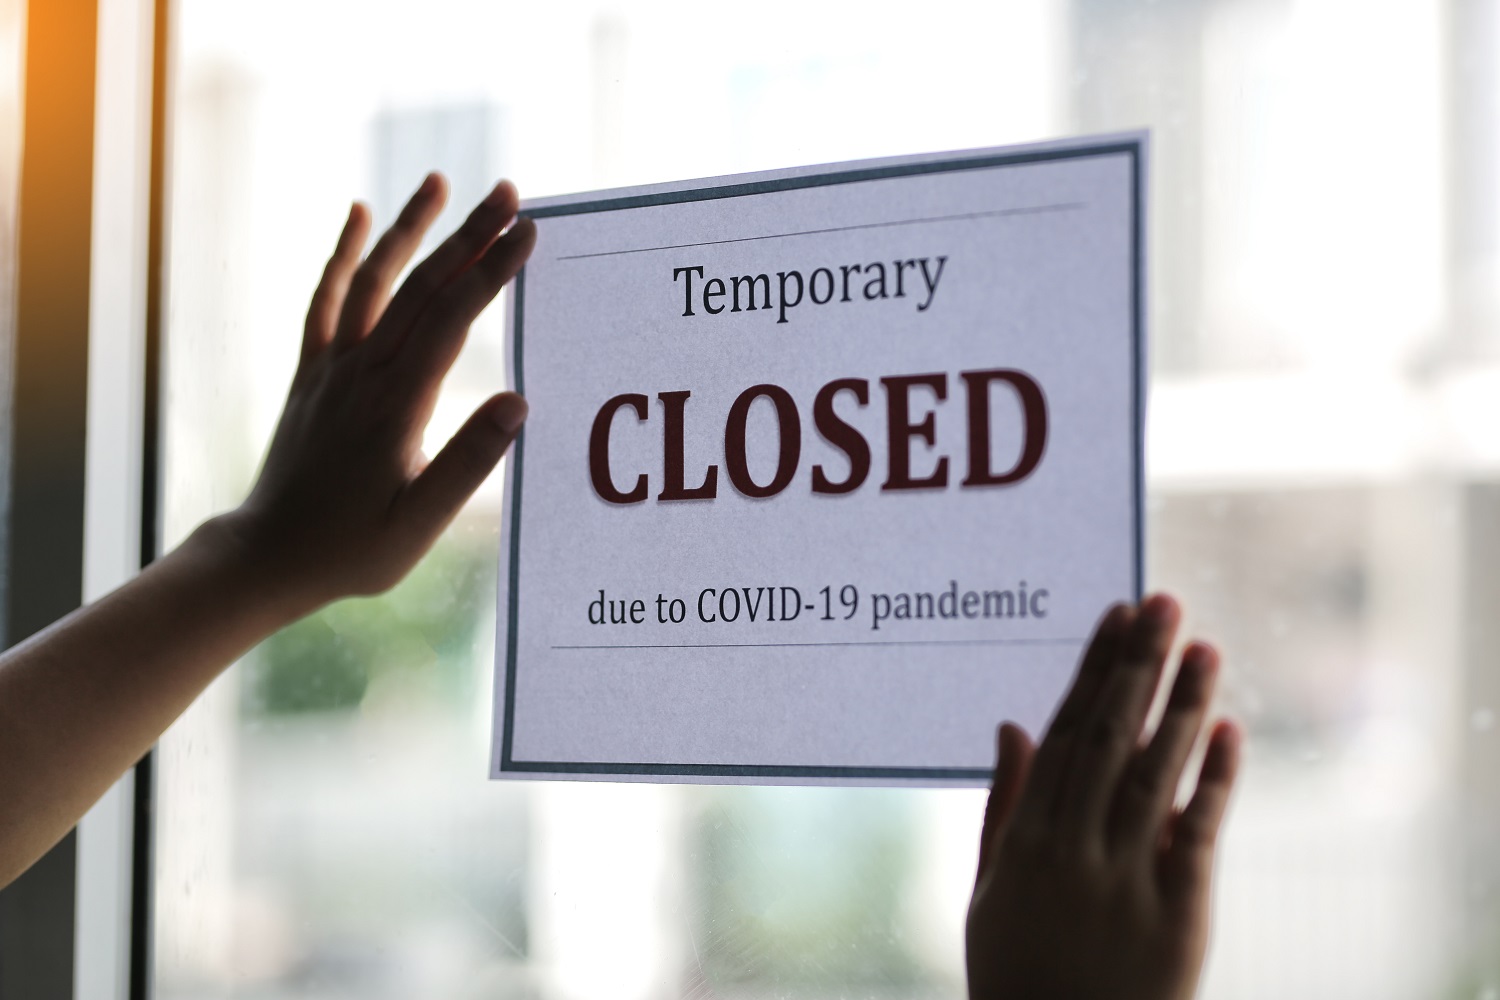 Image of temporarily closed sign for COVID 19